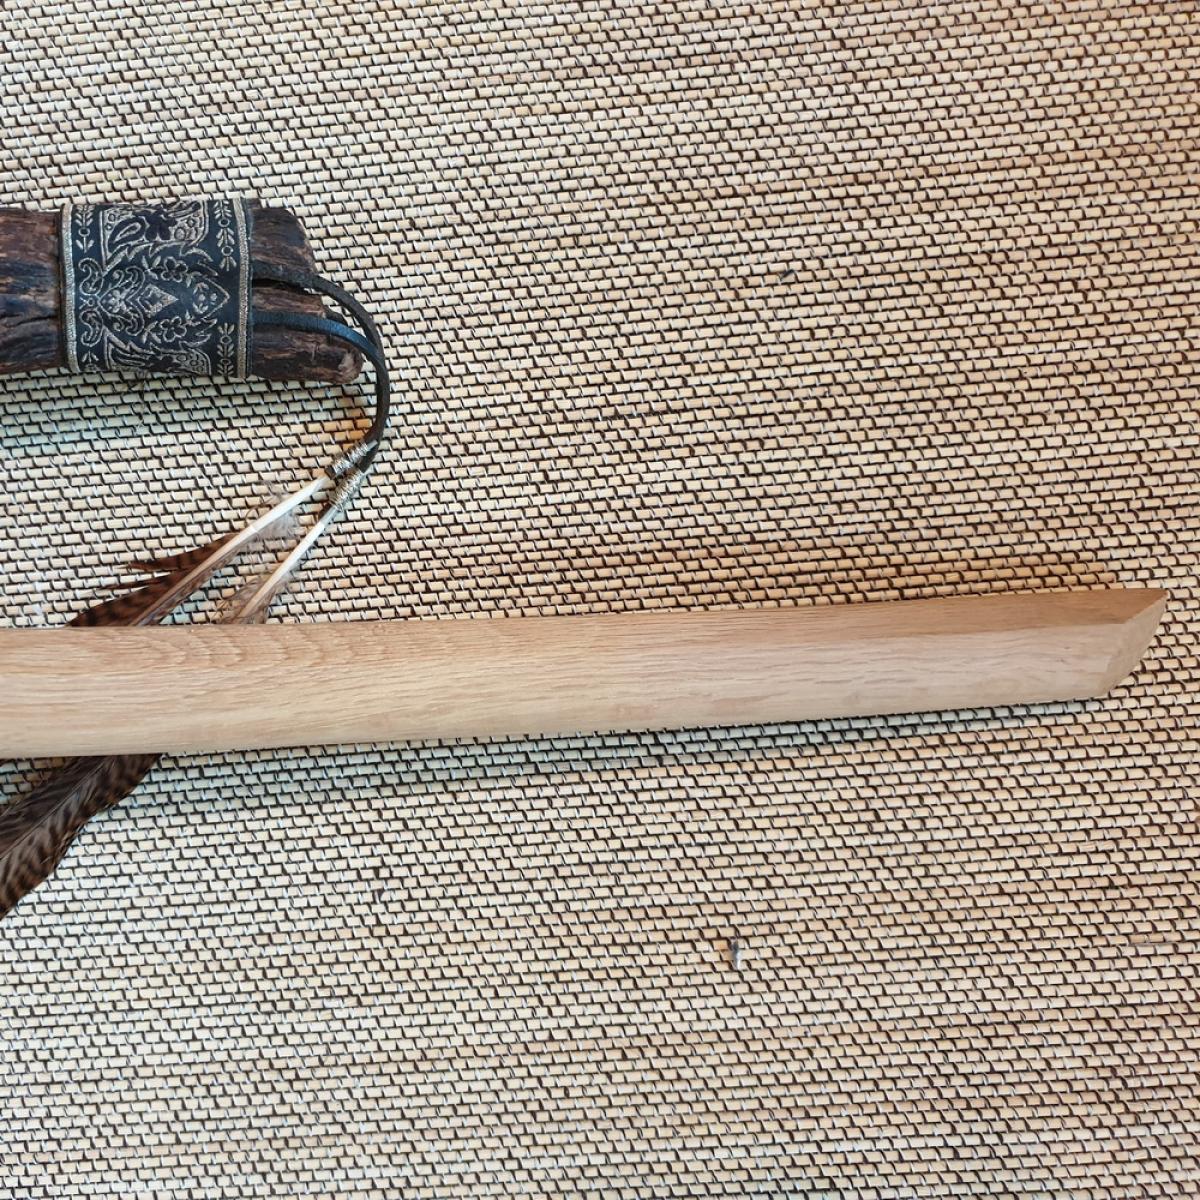 Bokken made of European beech wood in the Itto shape / heel for tsuba ♥ HANDMADE, UNIQUE & UNIQUE✅ For your martial artsAikido, Iaido, WingTsun, Kendo, Jodo✔Top price & high quality✅ only available here! ➽ www.bokken-welt.de